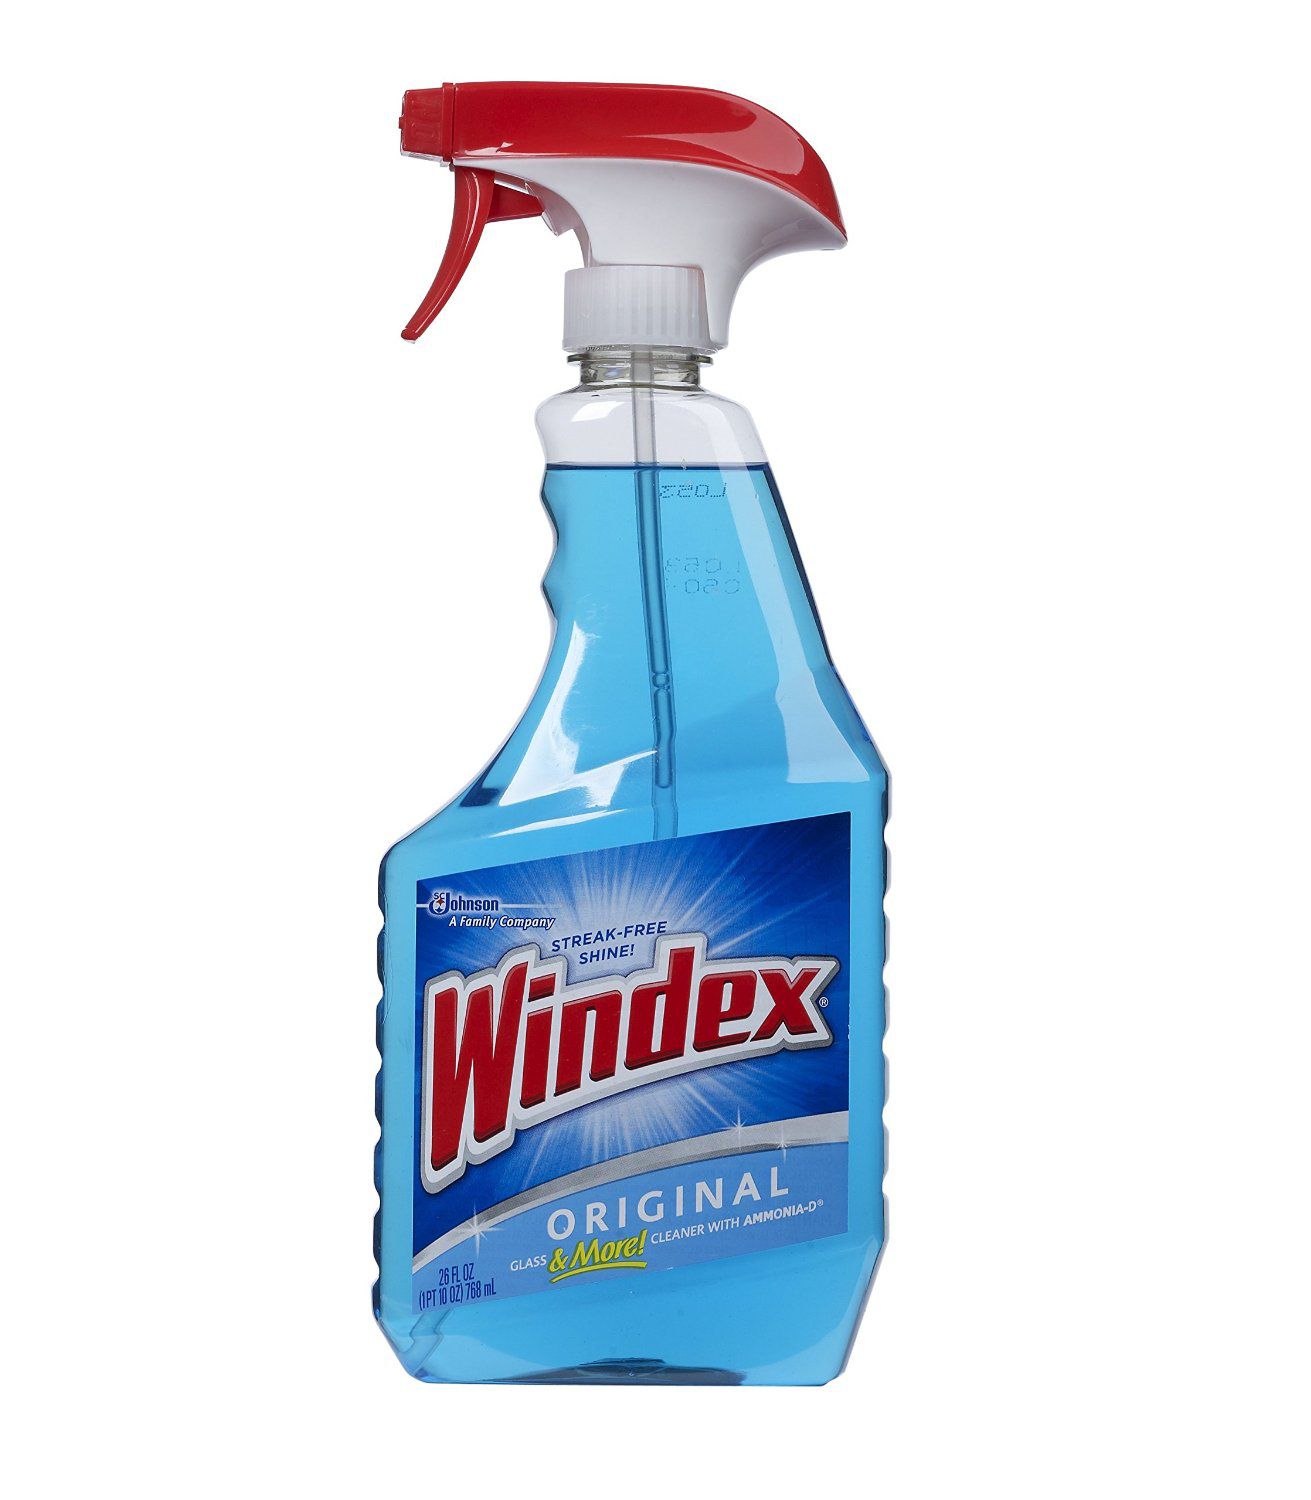 Seven Best Glass Cleaners